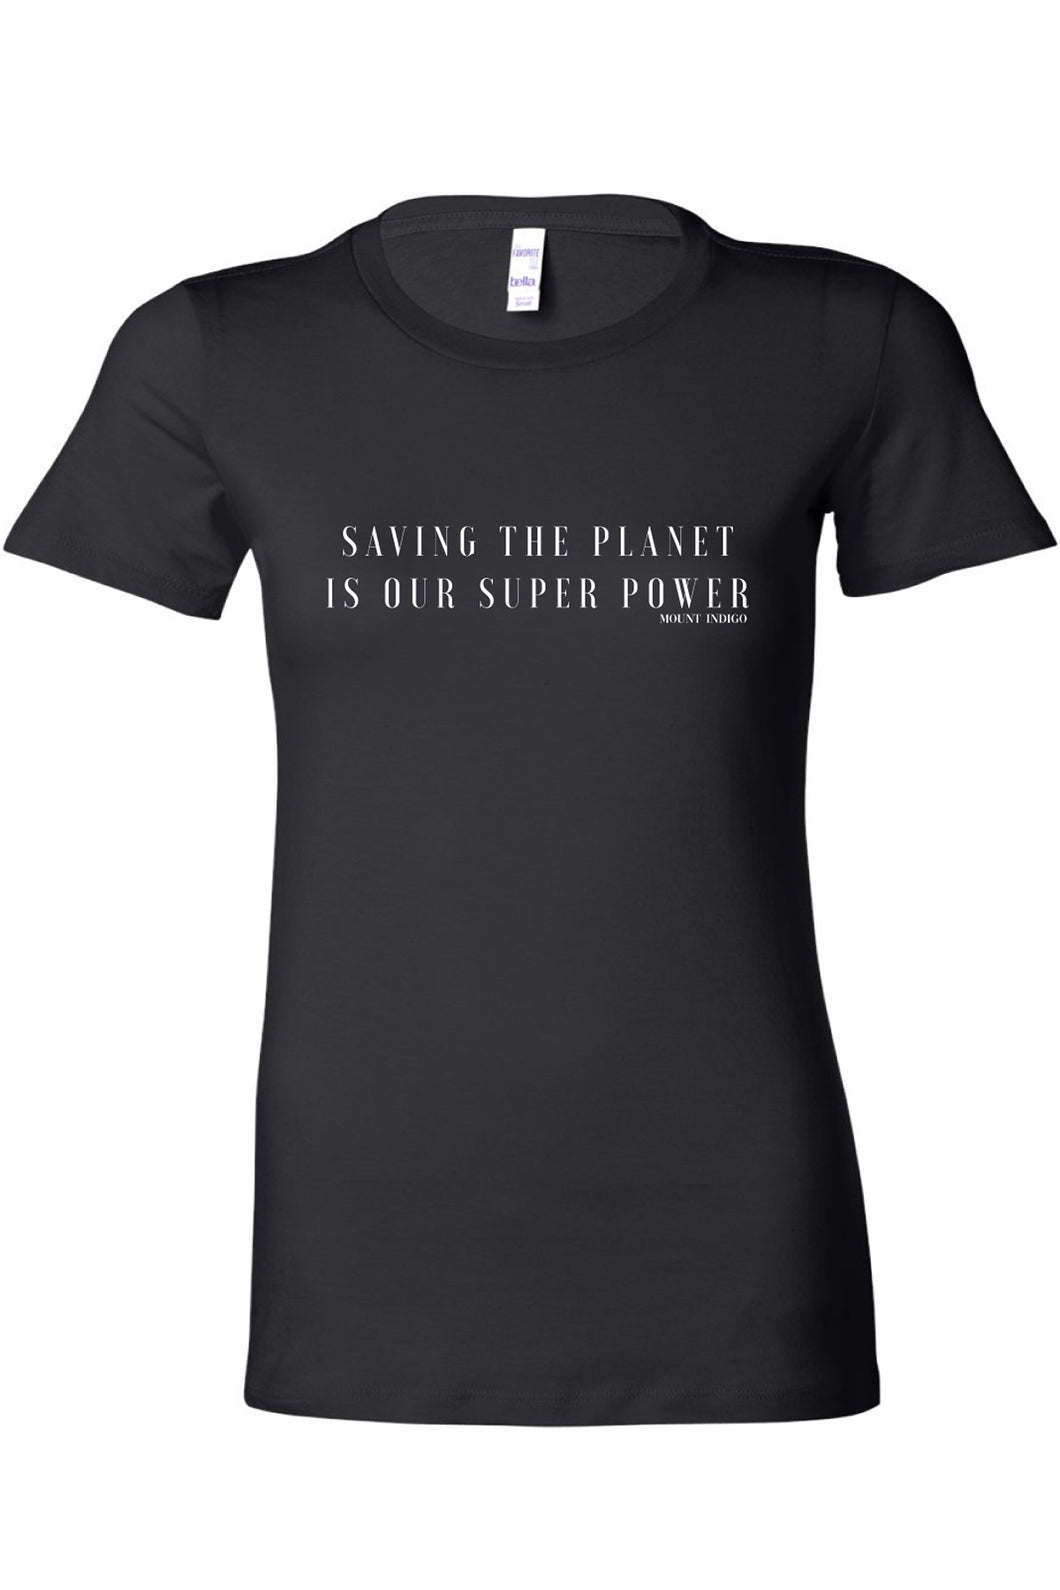 Saving The Planet Is Our Super Power Tee